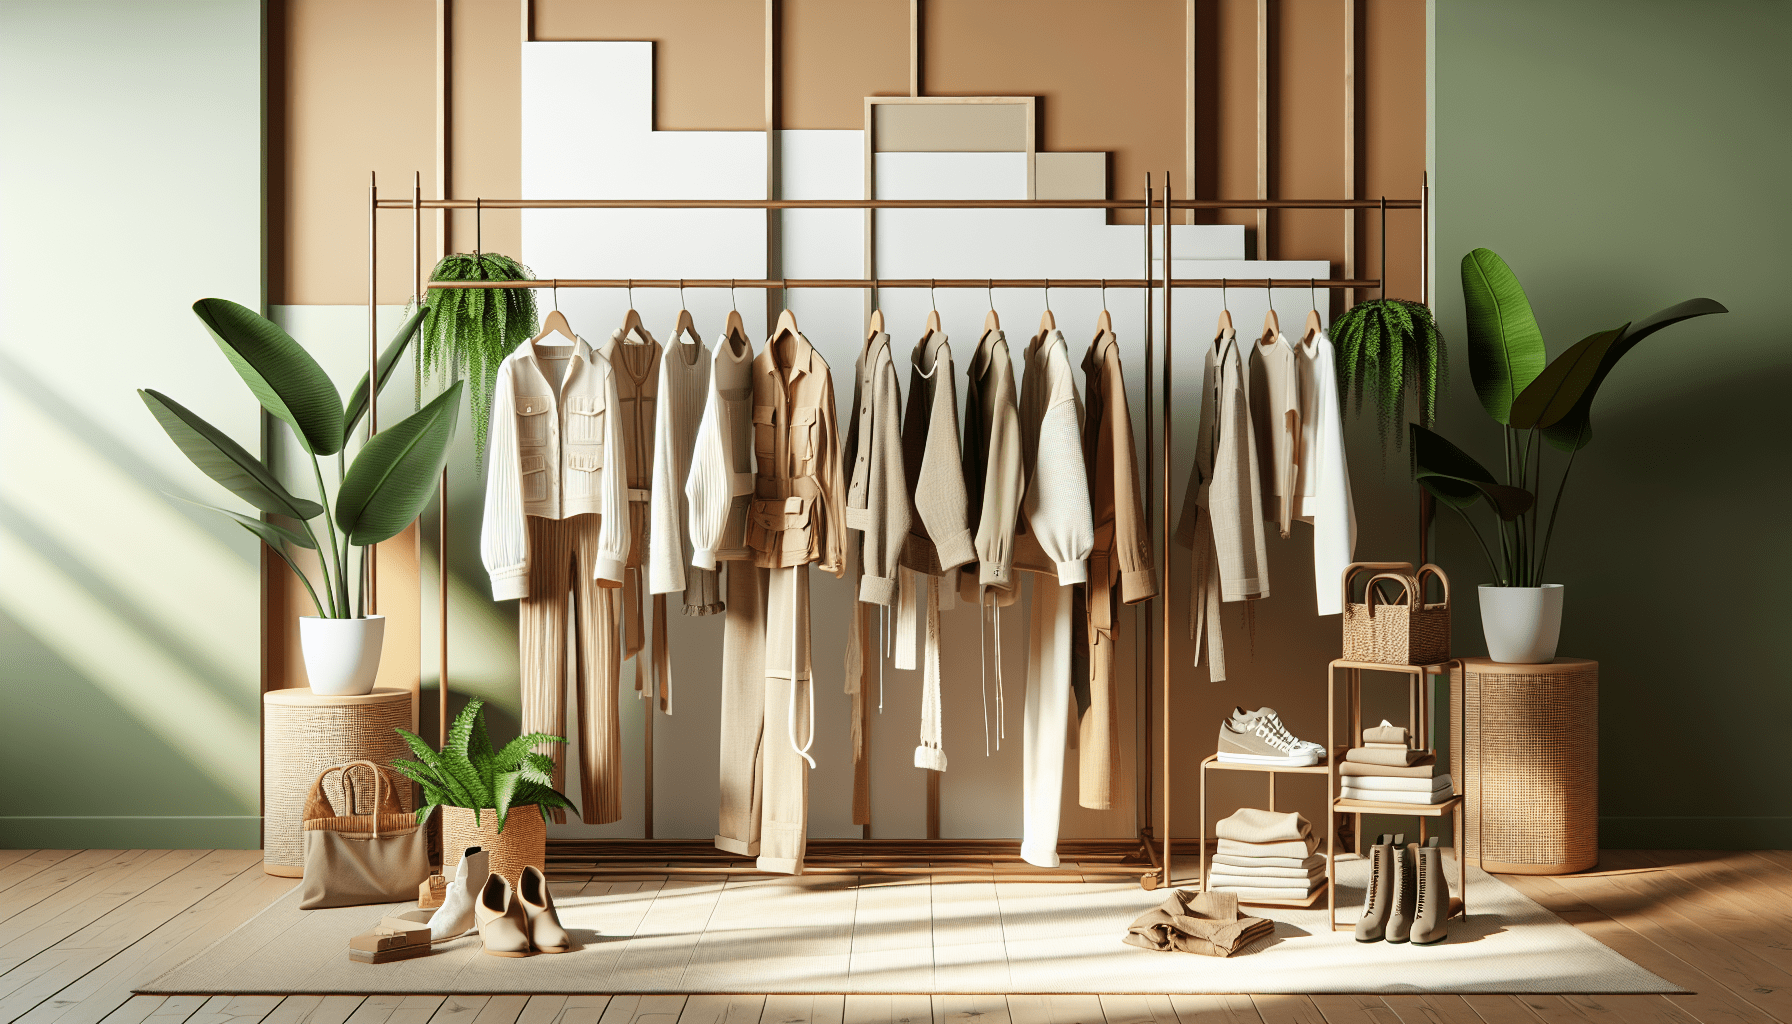 What Is Sustainable Fashion?